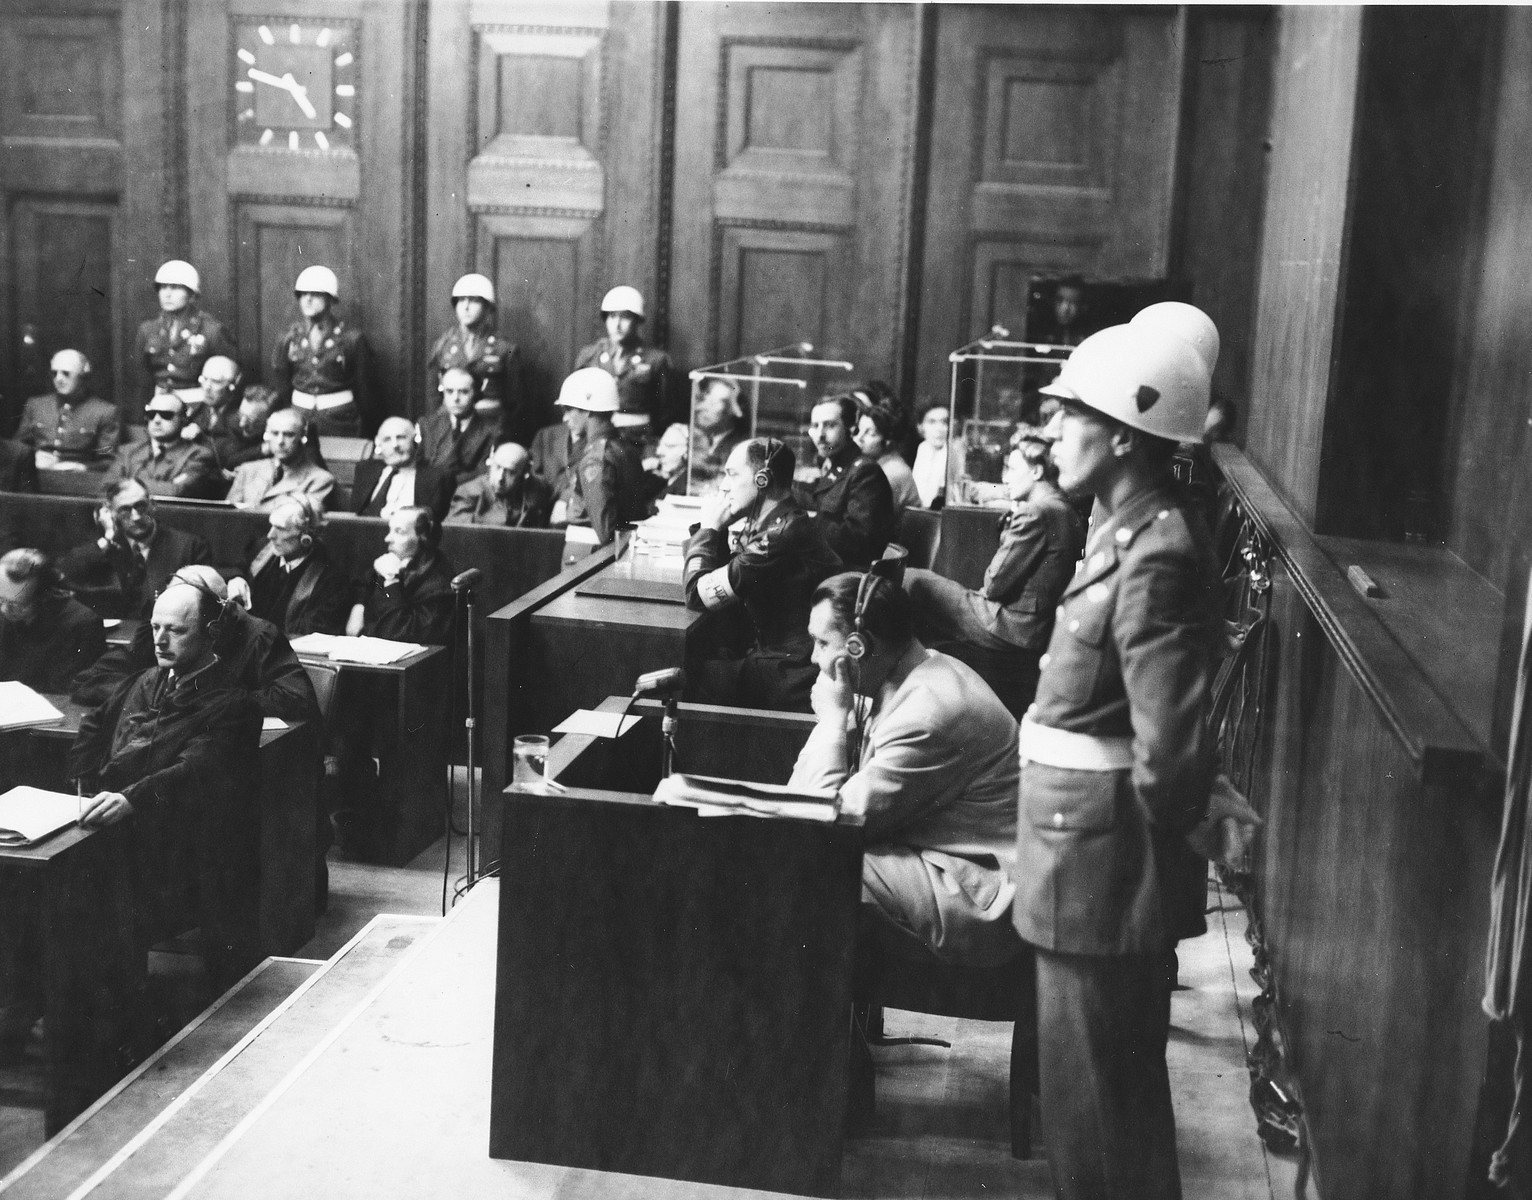 Hermann Goering sits in the witness stand with American Military policemen on either side during the International Military Tribunal in Nuremberg.

Standing in front is the donor, Albert Rose, an American military policeman.